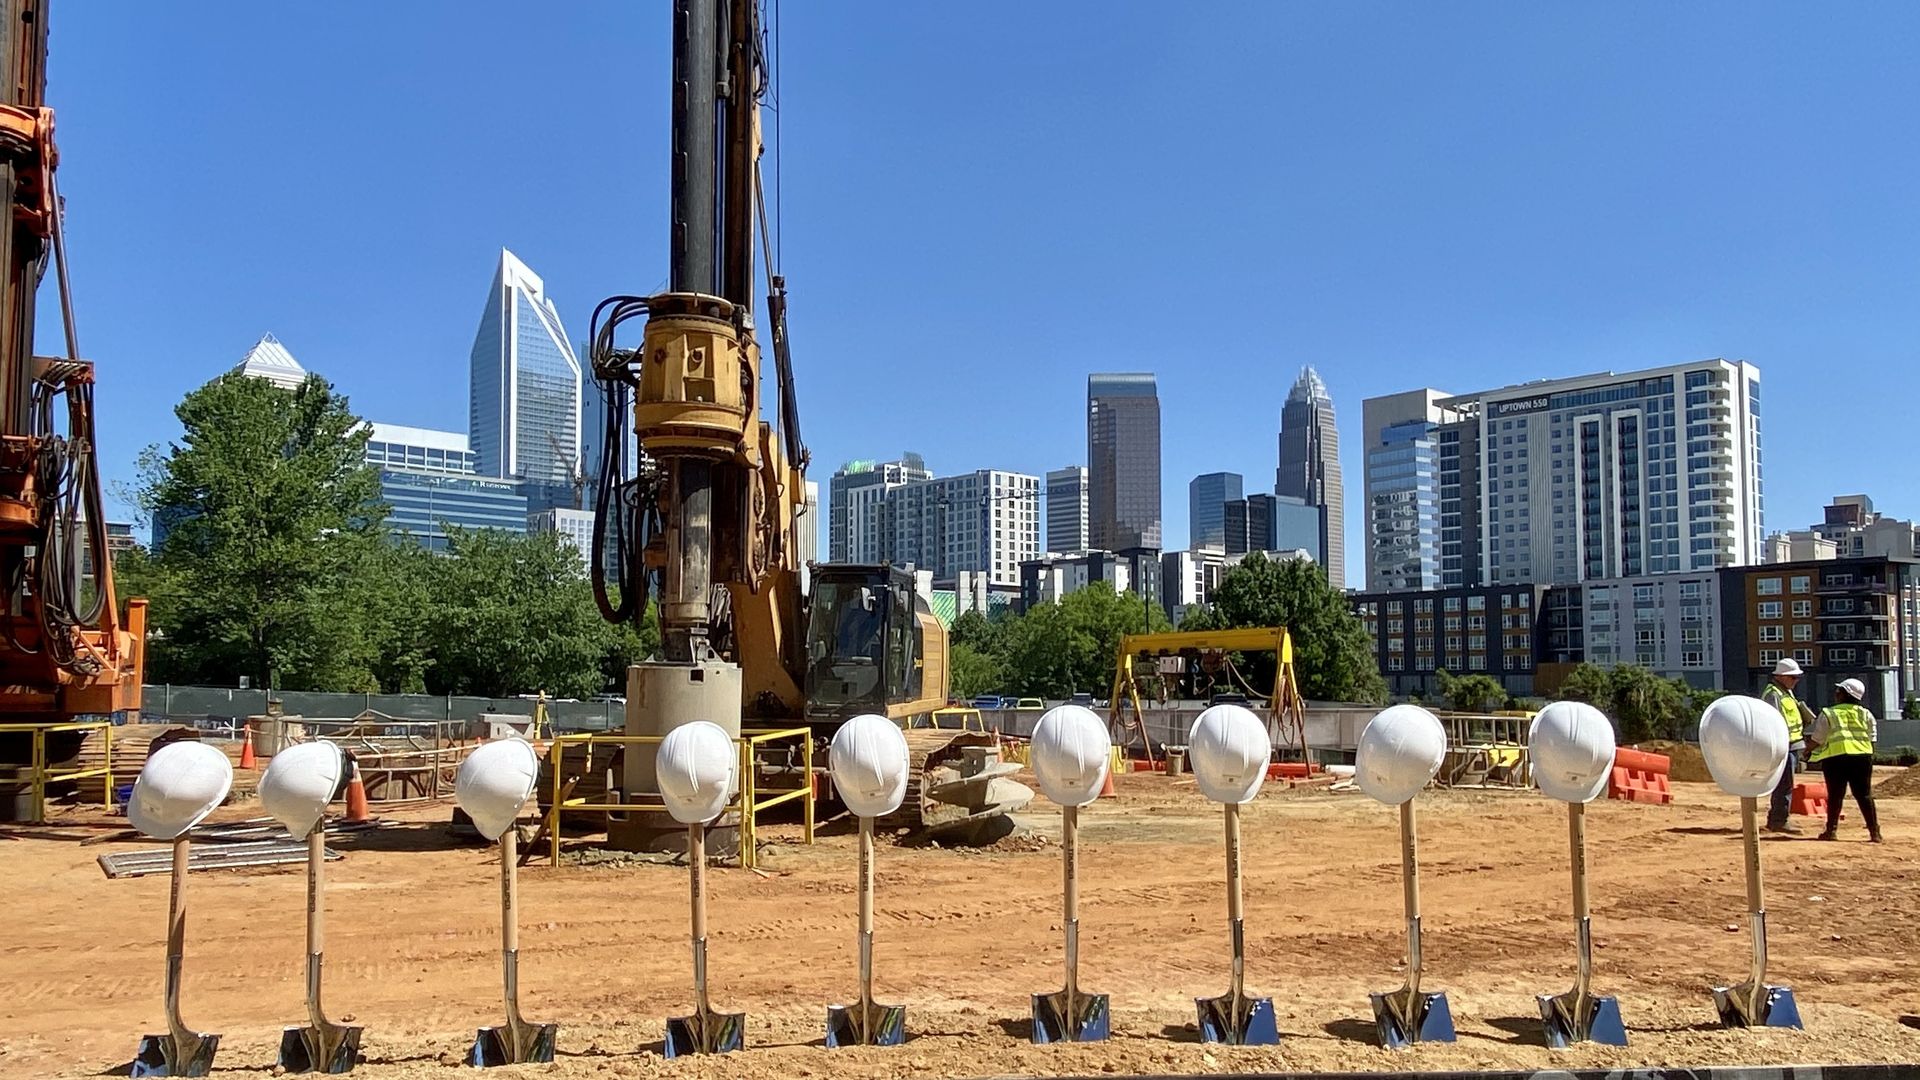 Construction site with 10 shovels lined up stuck in the sand and 10 hard hats stacked on top. There's a crane in the background and behind that is the Charlotte skyline. 